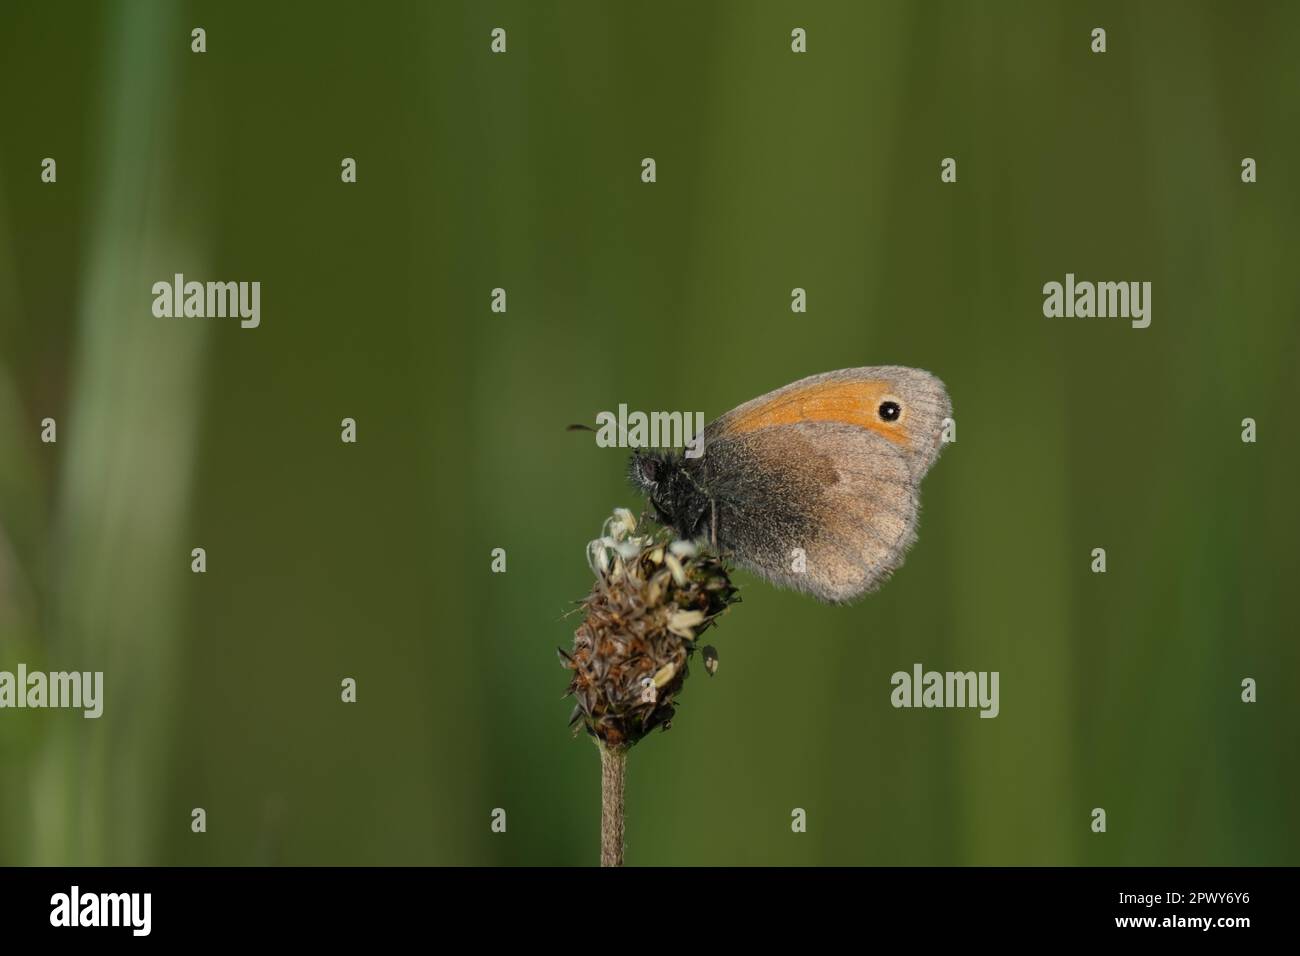 Macro close up of a small heath butterfly in nature resting on a plant natural background Stock Photo